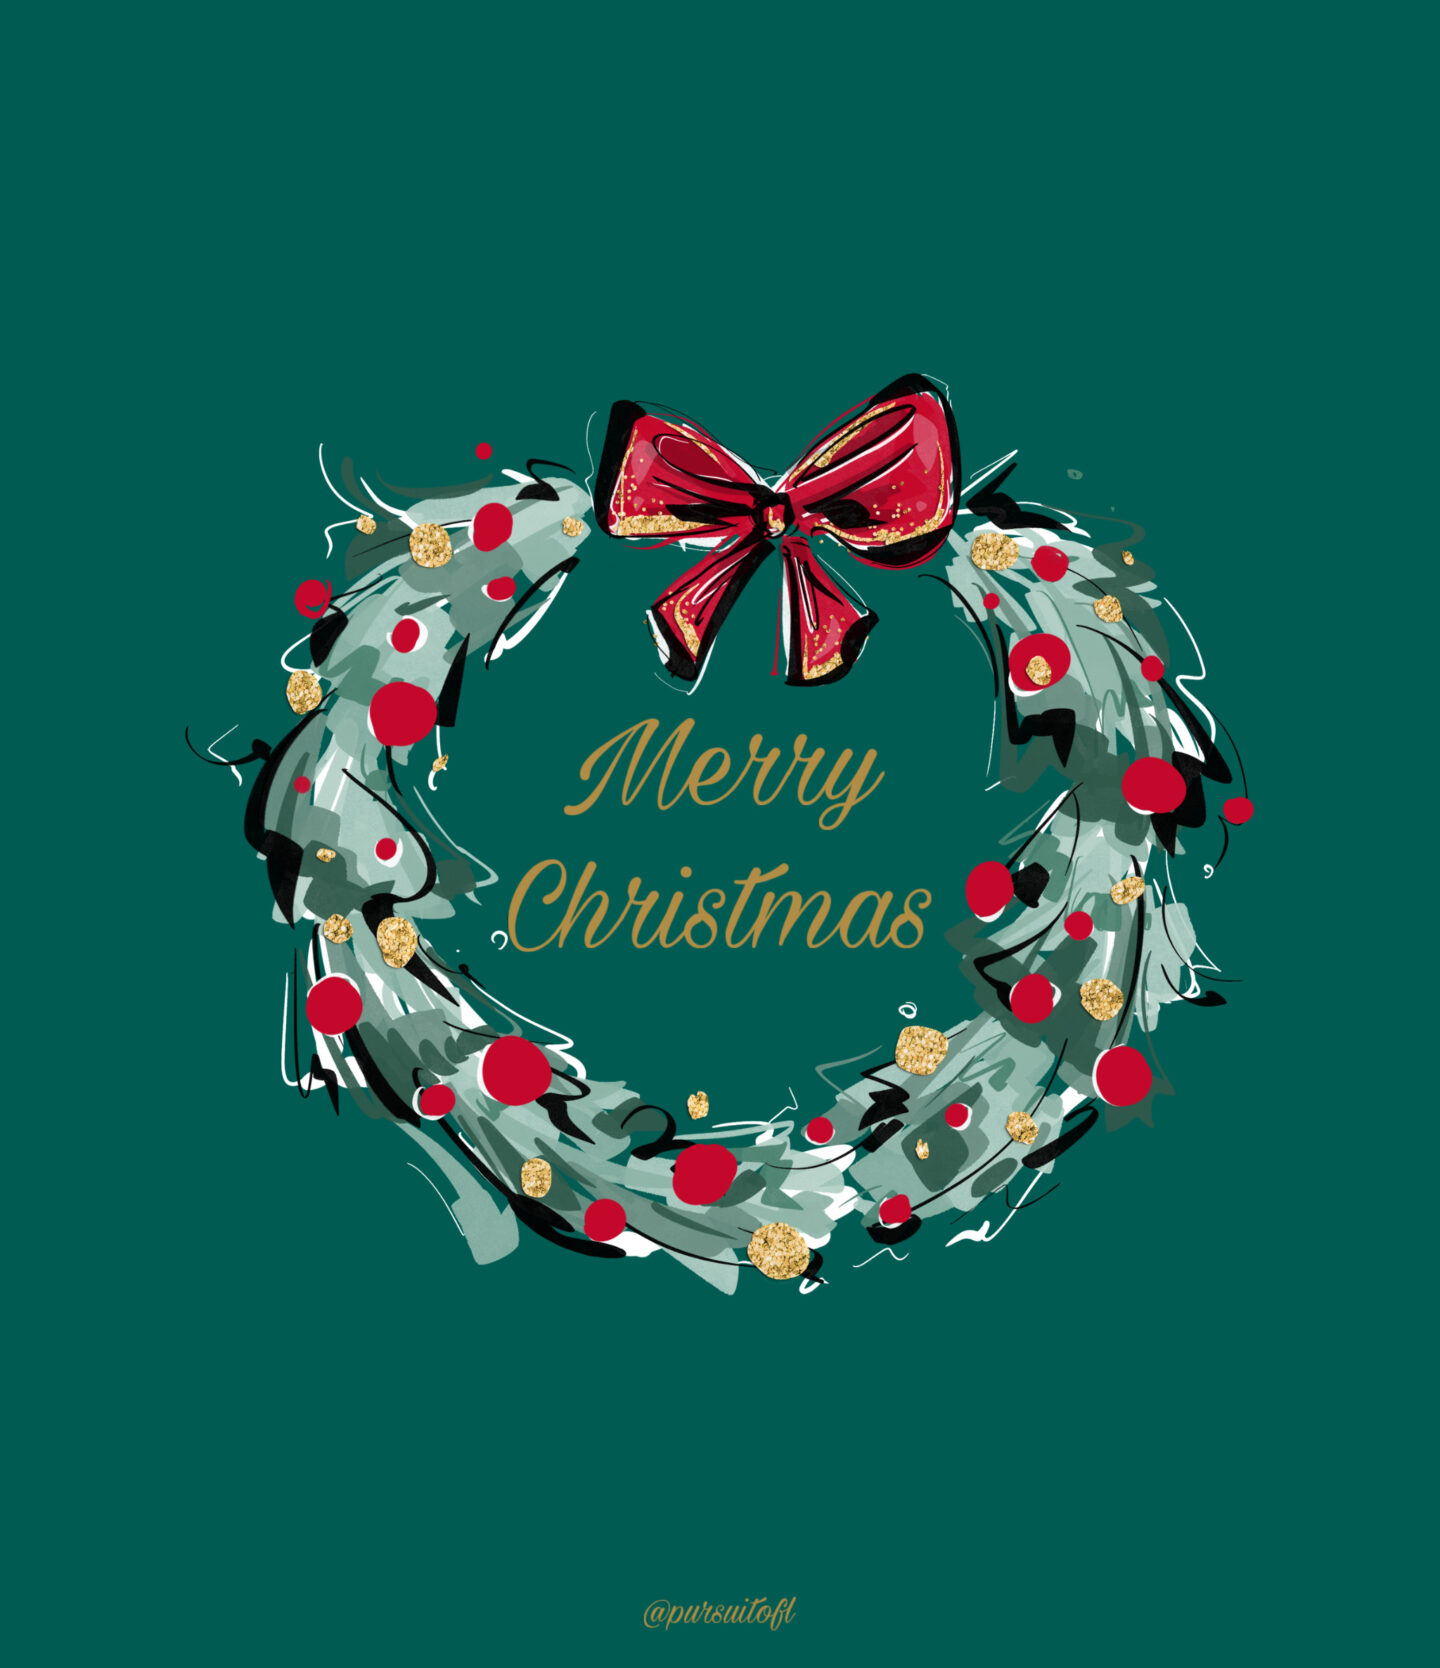 Forest green holiday tablet wallpaper with Christmas wreath and Merry Christmas text